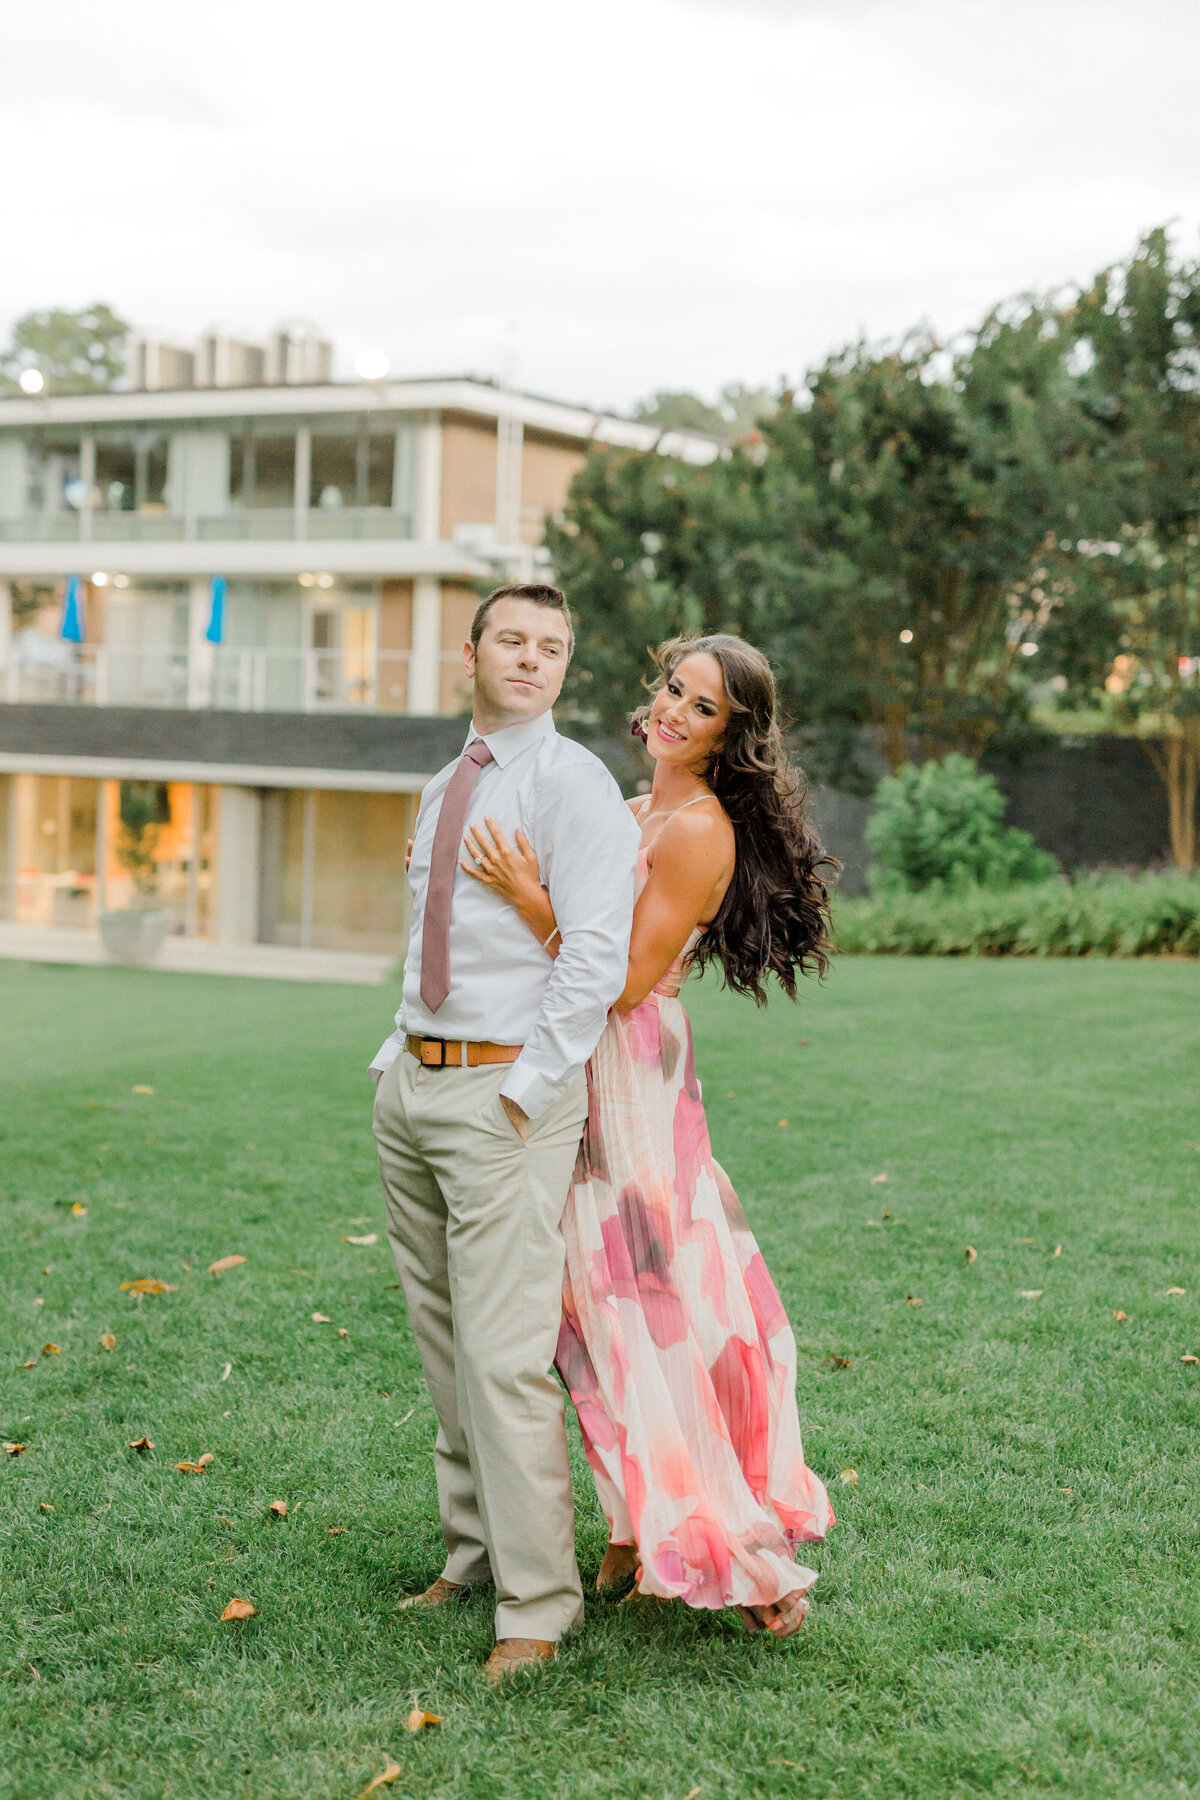 Danielle-Pressley-Photography-Couples-Session292